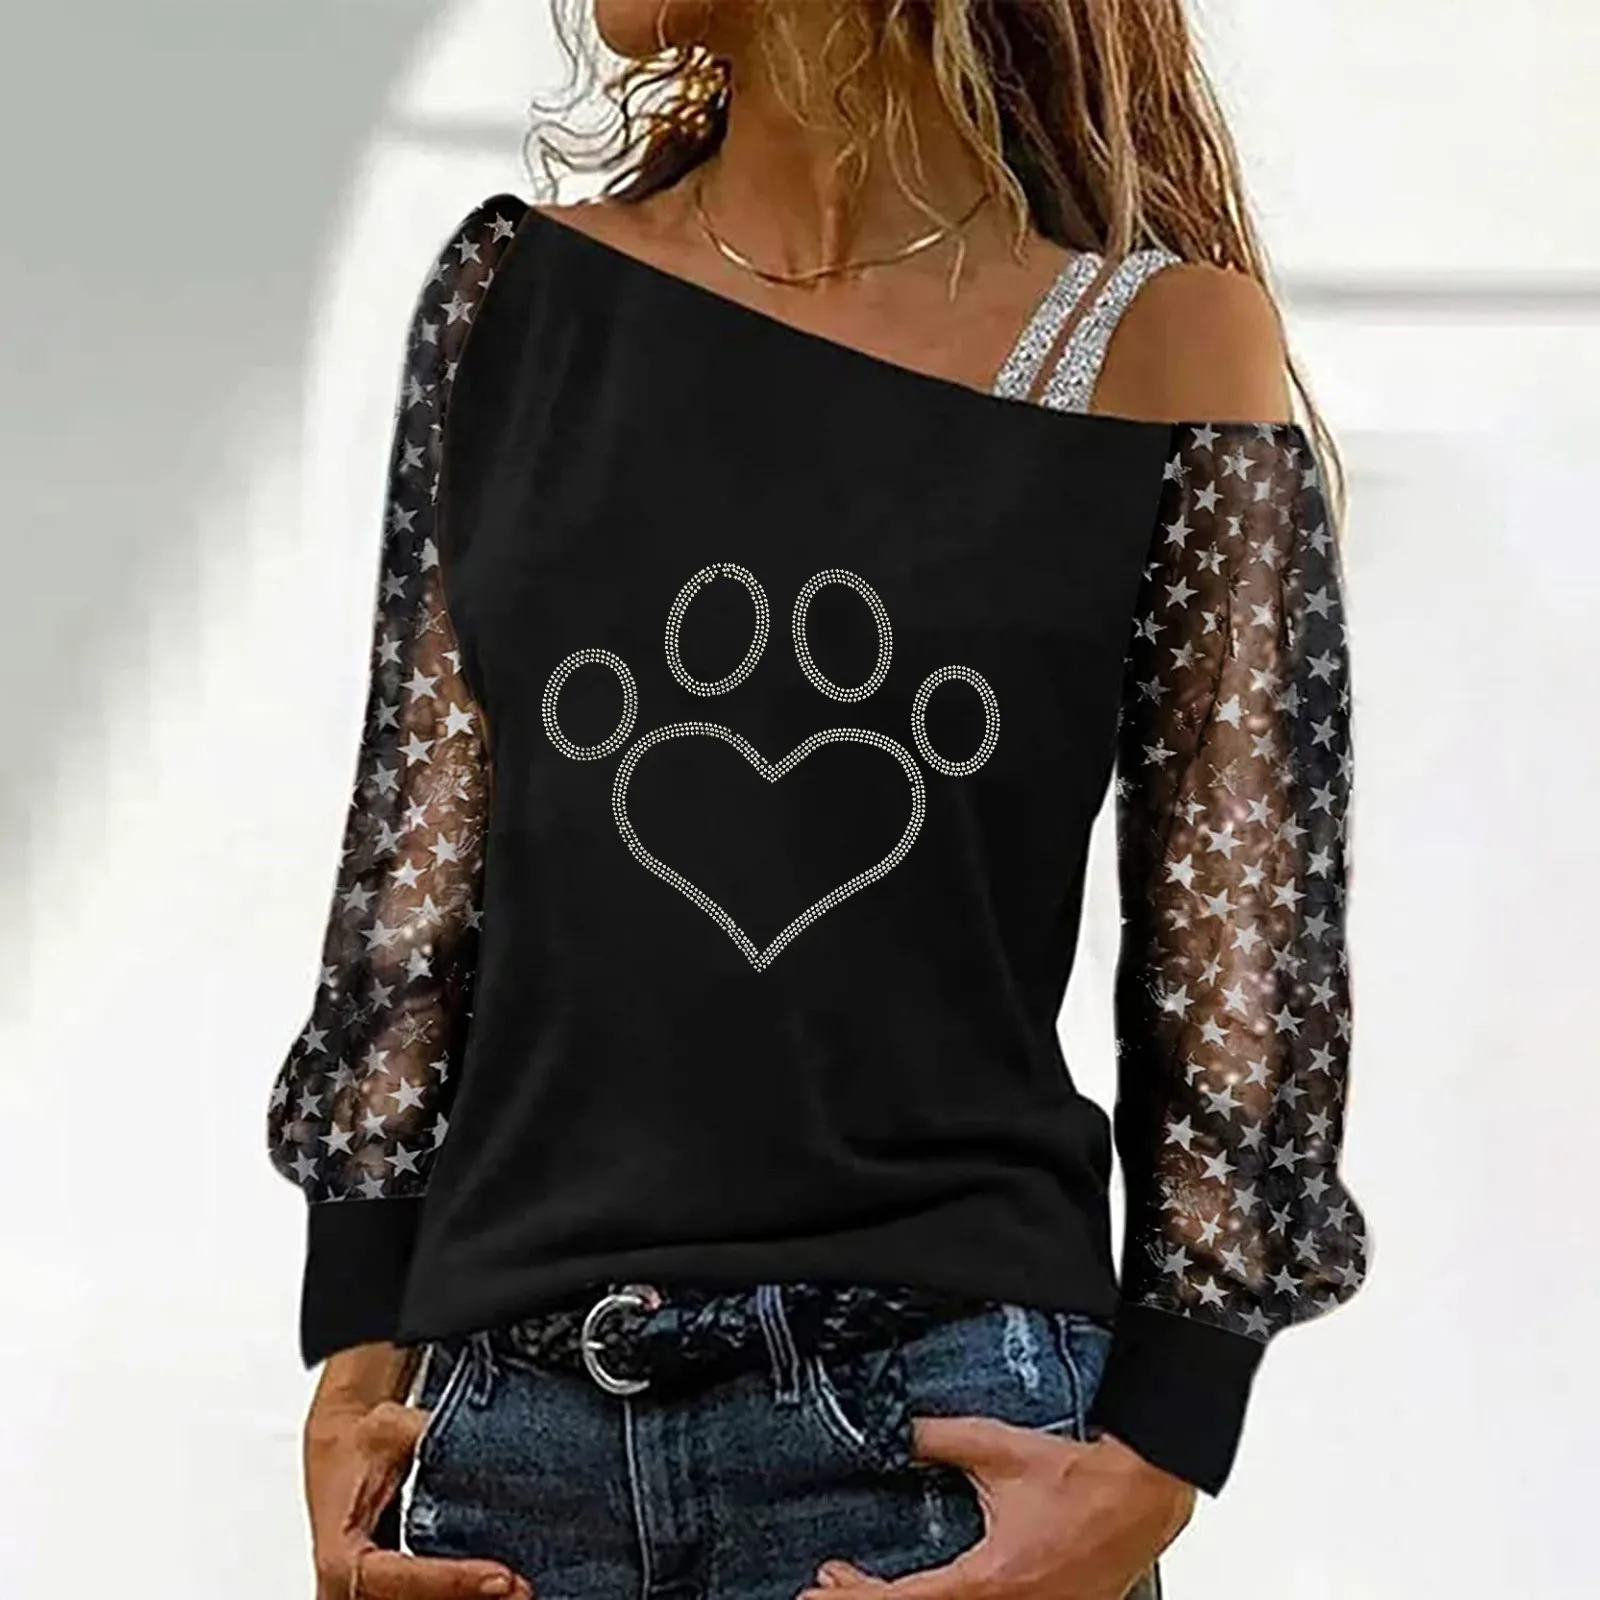 Fashion Sexy Printed T-shirt Women Long Sleeves Cat Print Off-the-shoulder Pullover Casual Loose Shiny Sequin Blouse Tunic Tops vintage graphic tees Tees